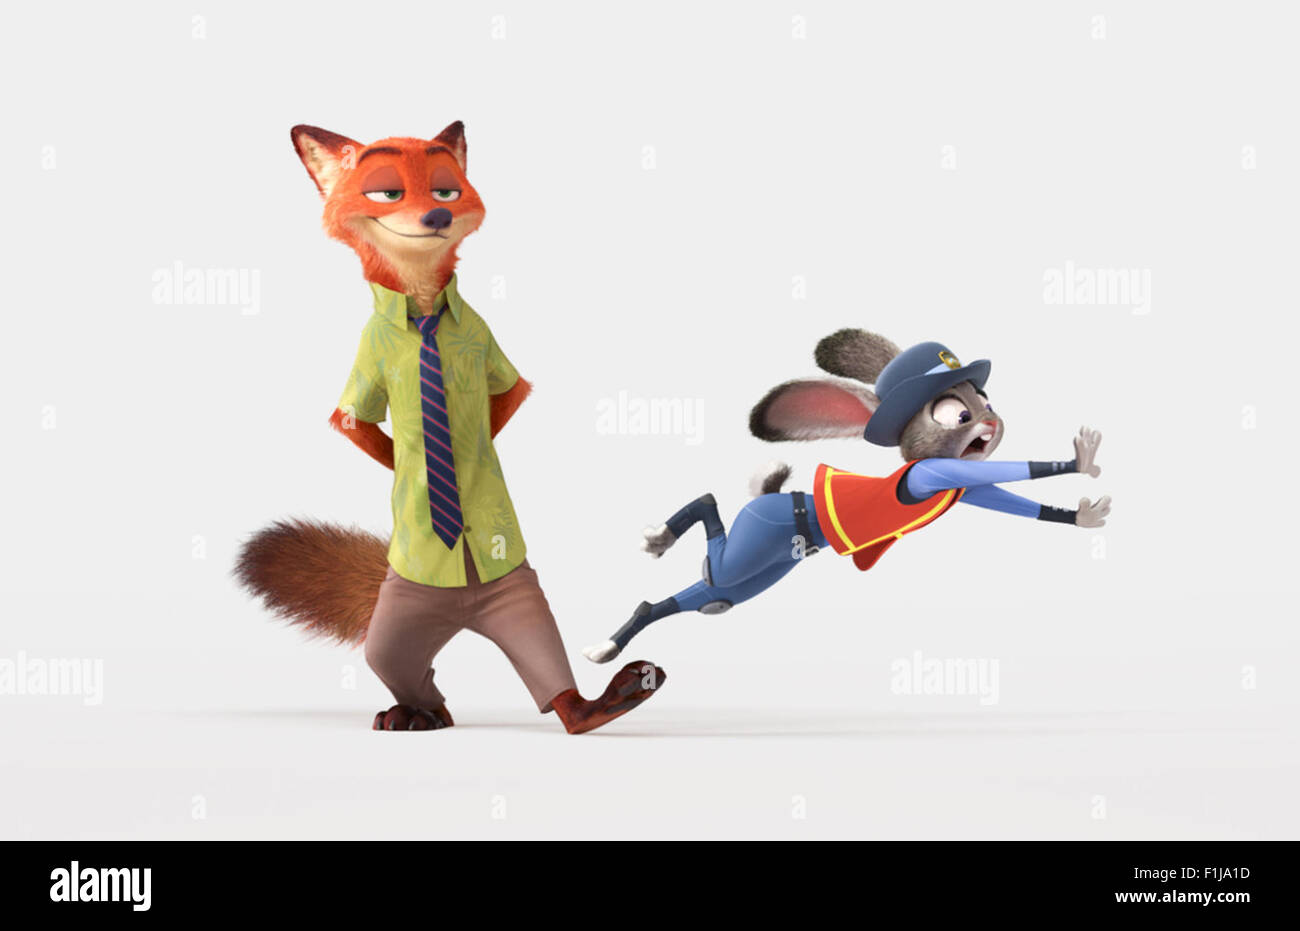 Zootopia (also known as Zootropolis in the United Kingdom) is an upcoming  American computer-animated comedy-adventure film produced by Walt Disney  Animation Studios and the 55th film in Disney's animated features canon.  This